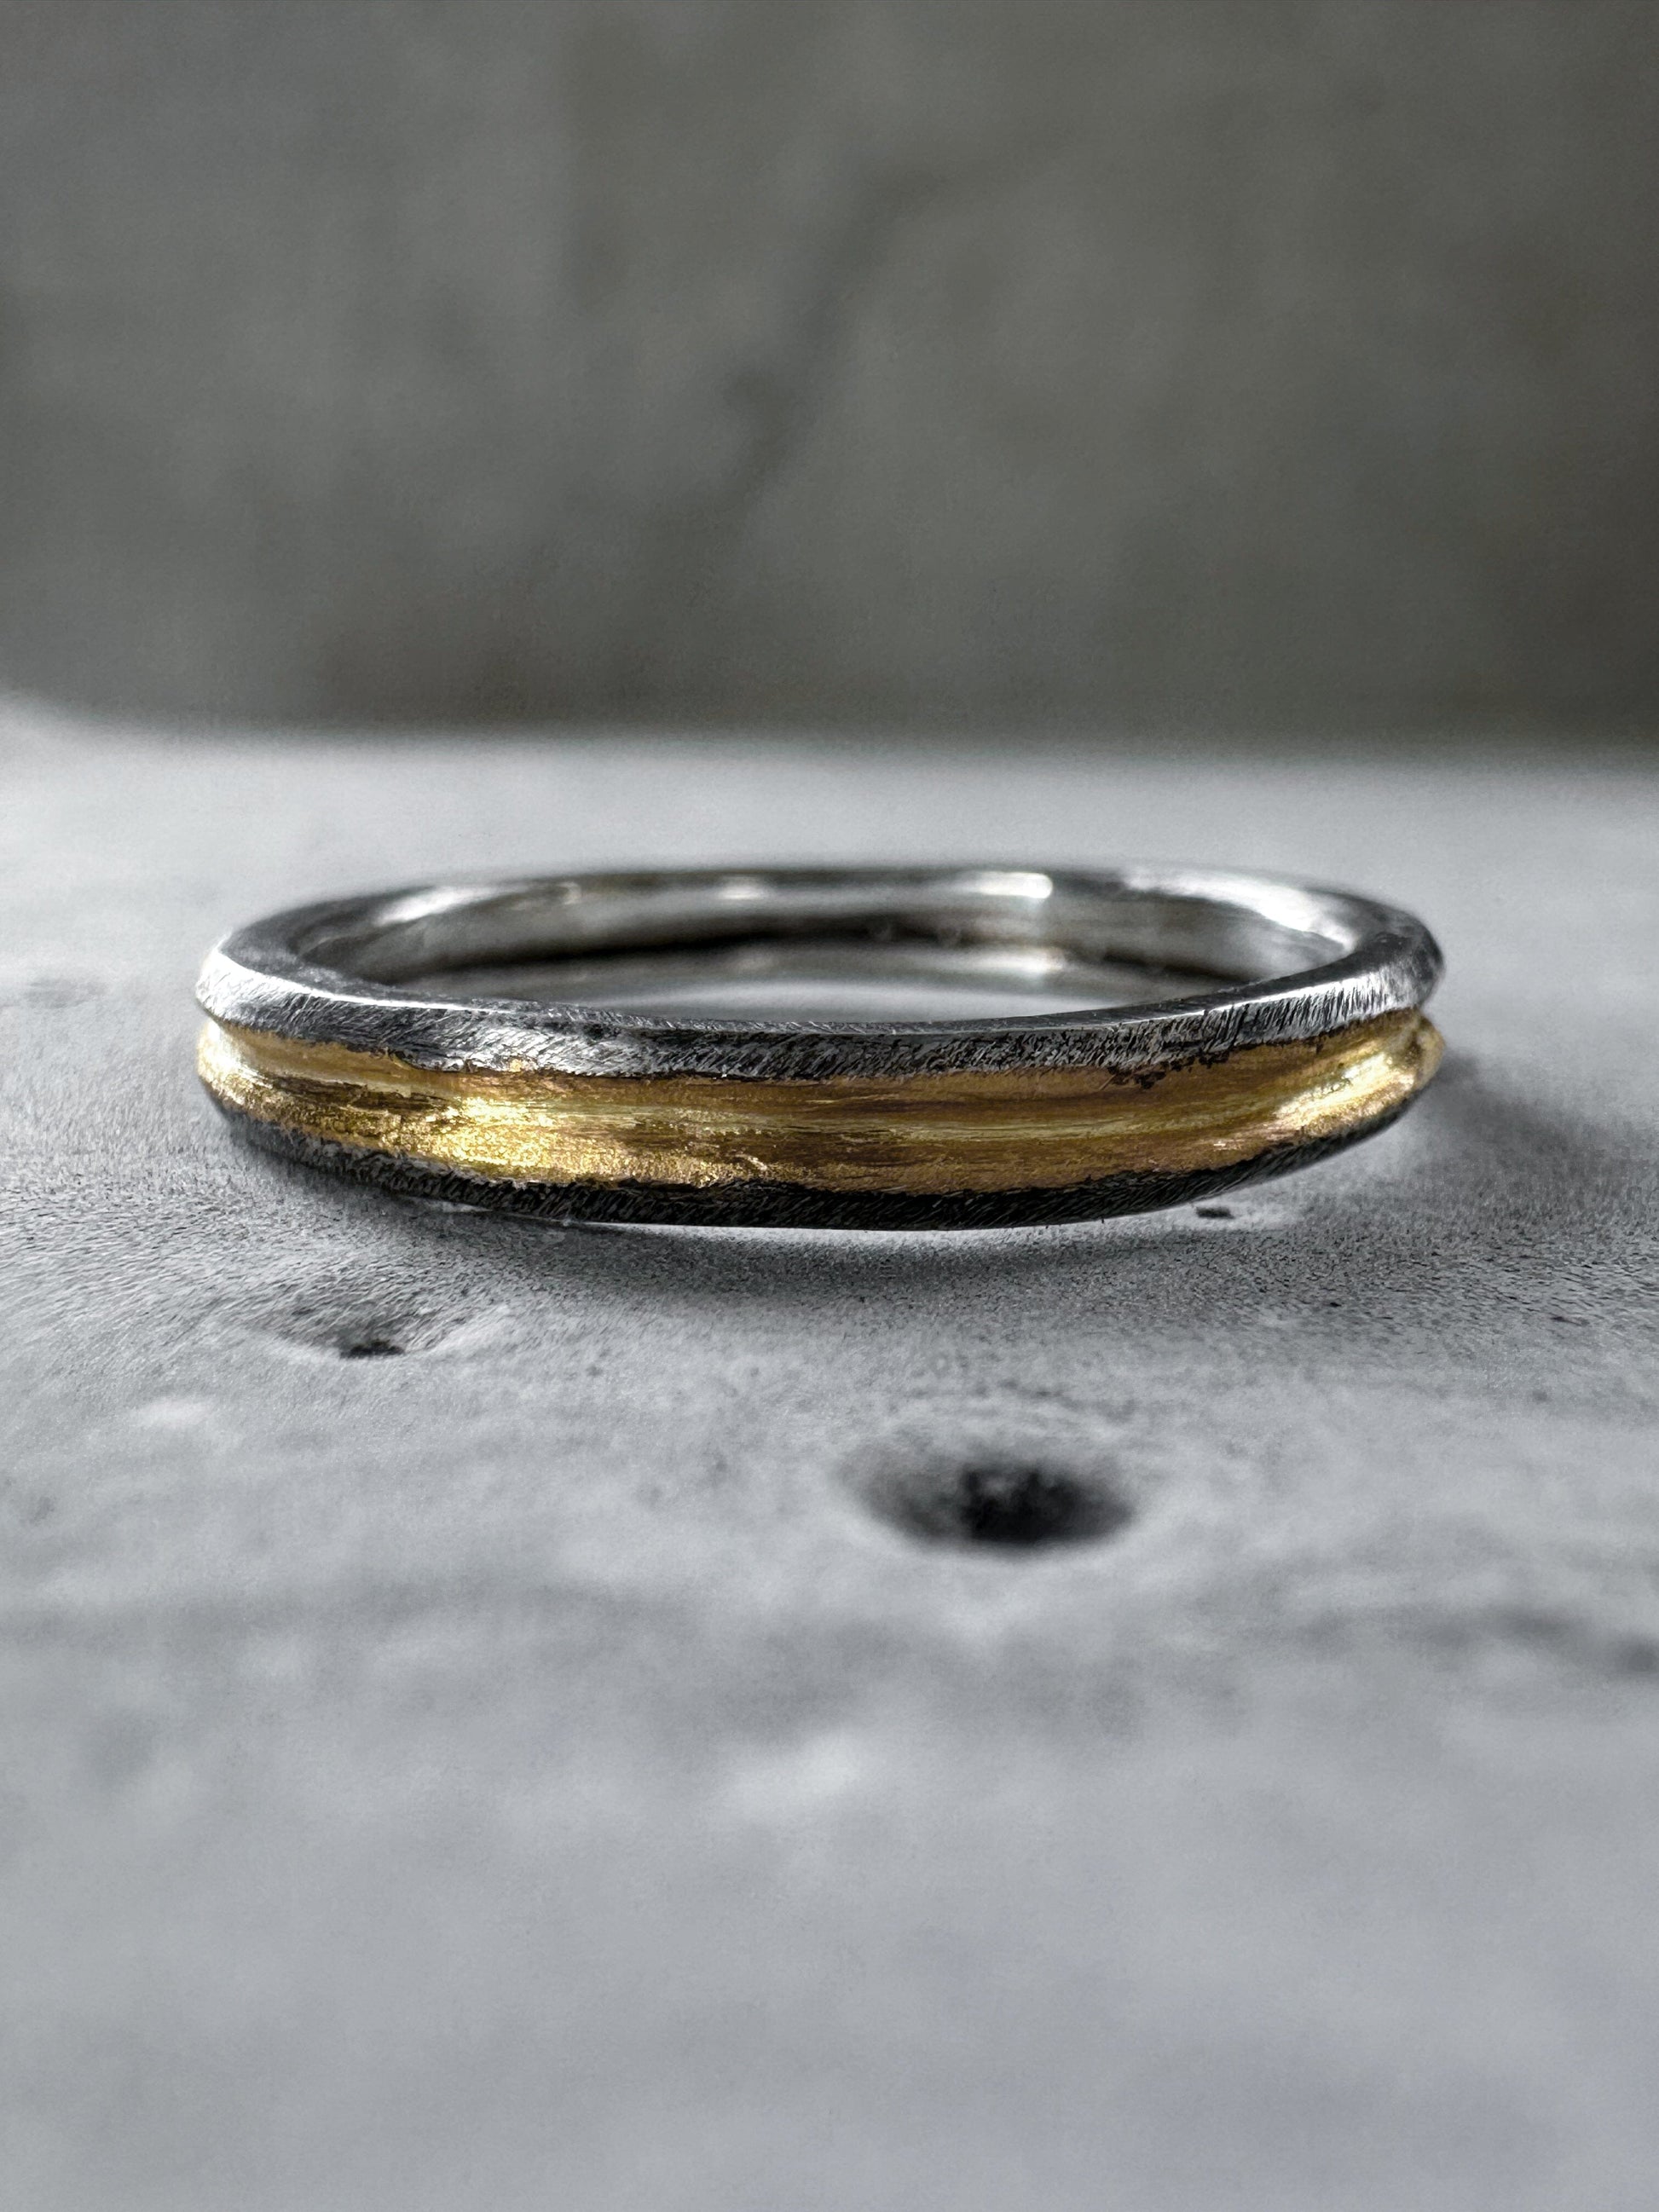 Golden line Ring- elegant light silver ring with a soft scratched texture and 24k gold plated strip Lightweight rings Project50g 